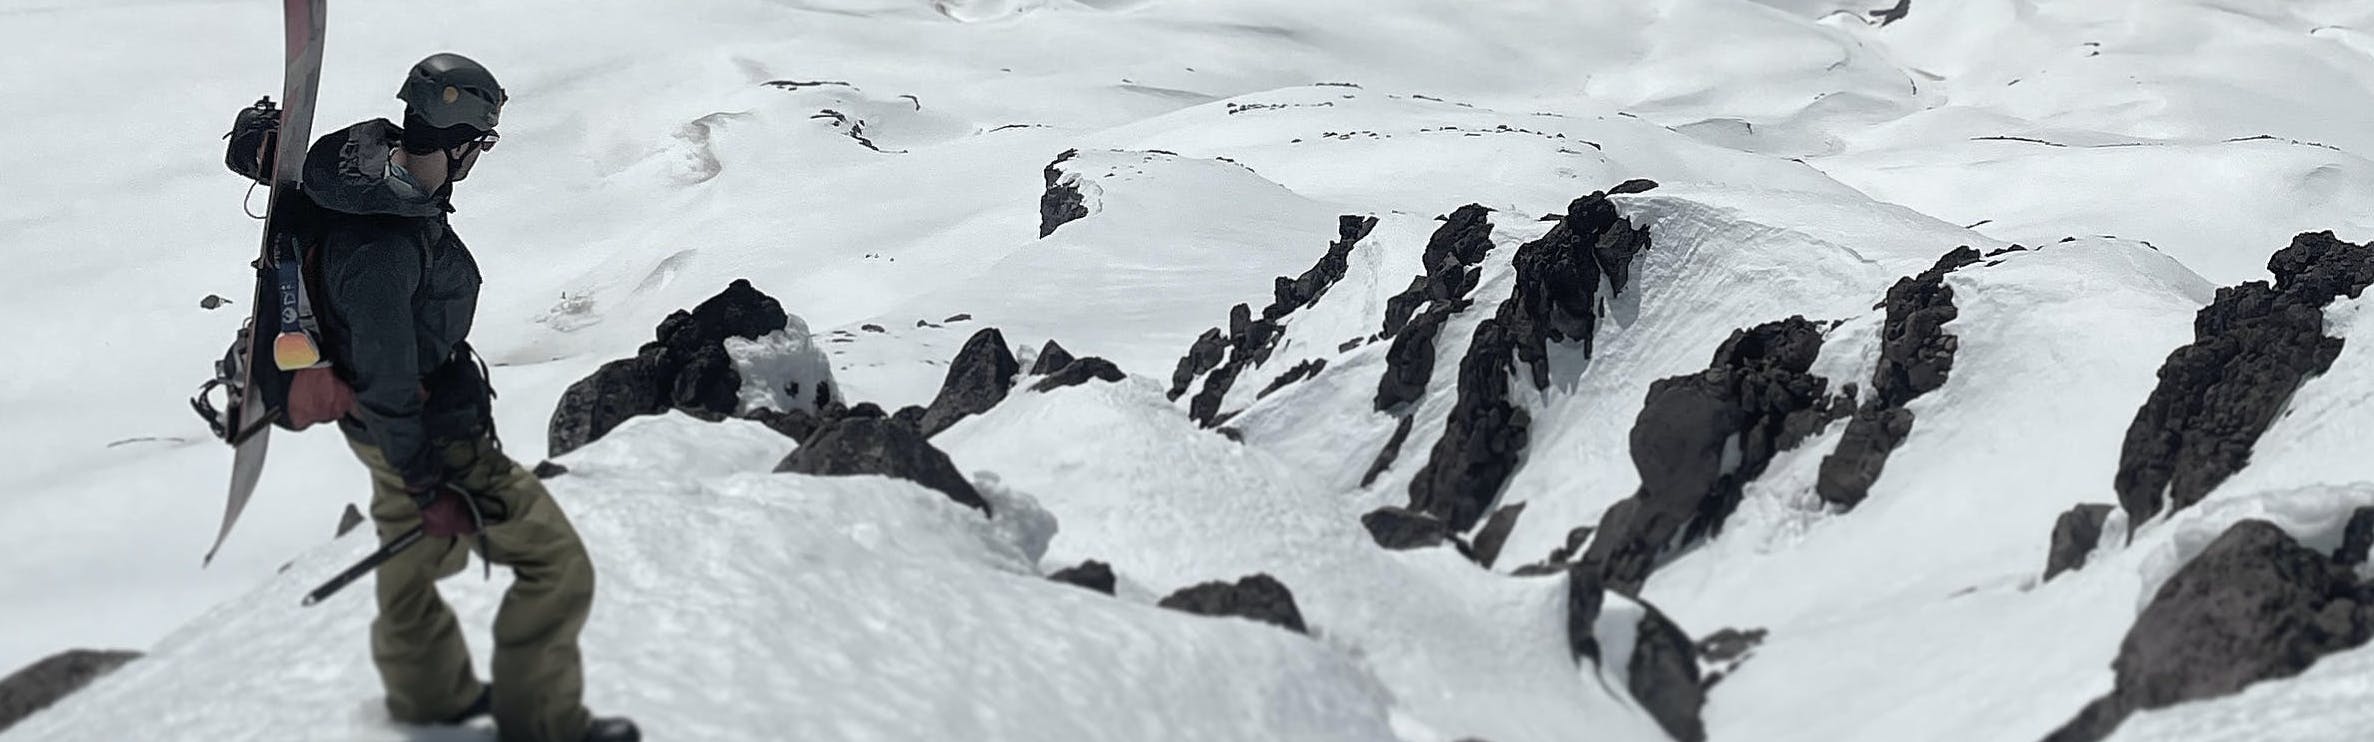 A snowboarder standing at the top of a snowy cliff.